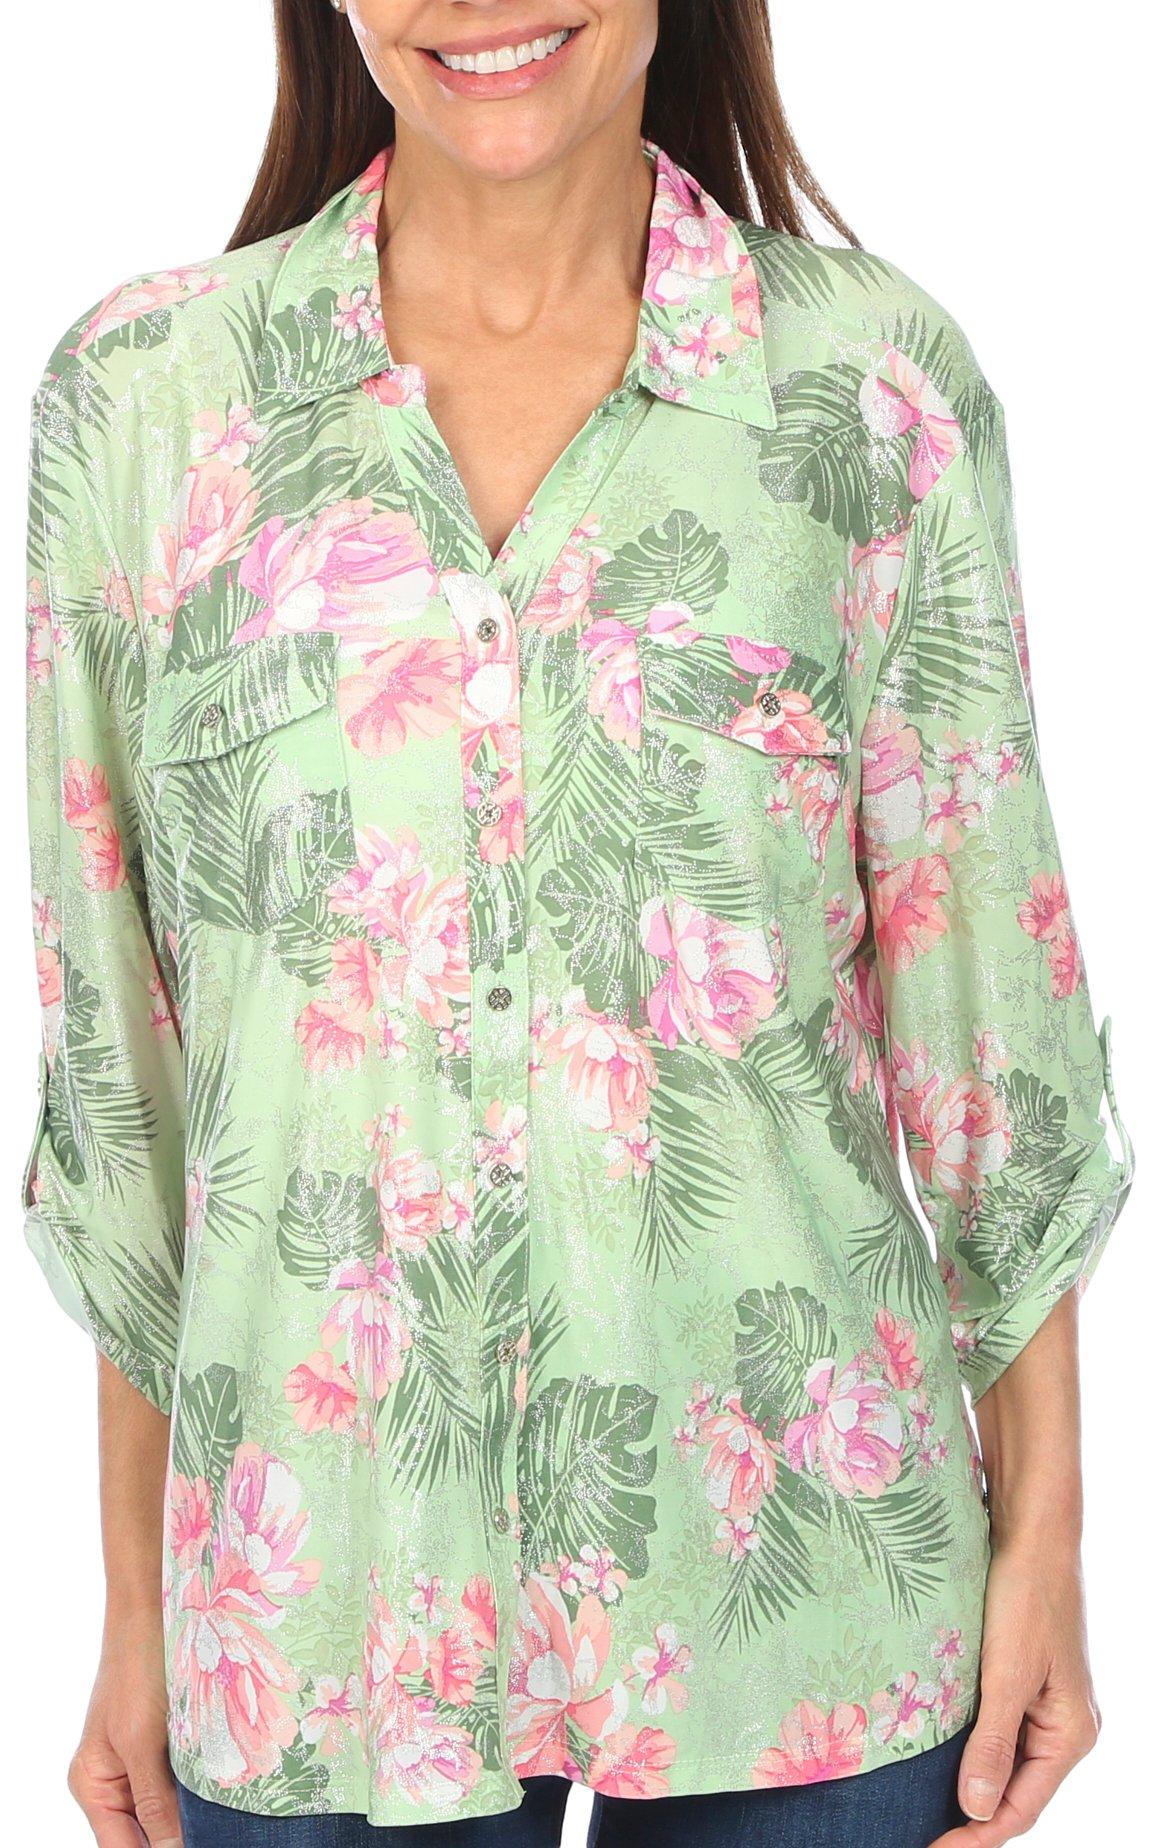 Coral Bay Womens Floral Print Pocket Button 3/4 Sleeve Top